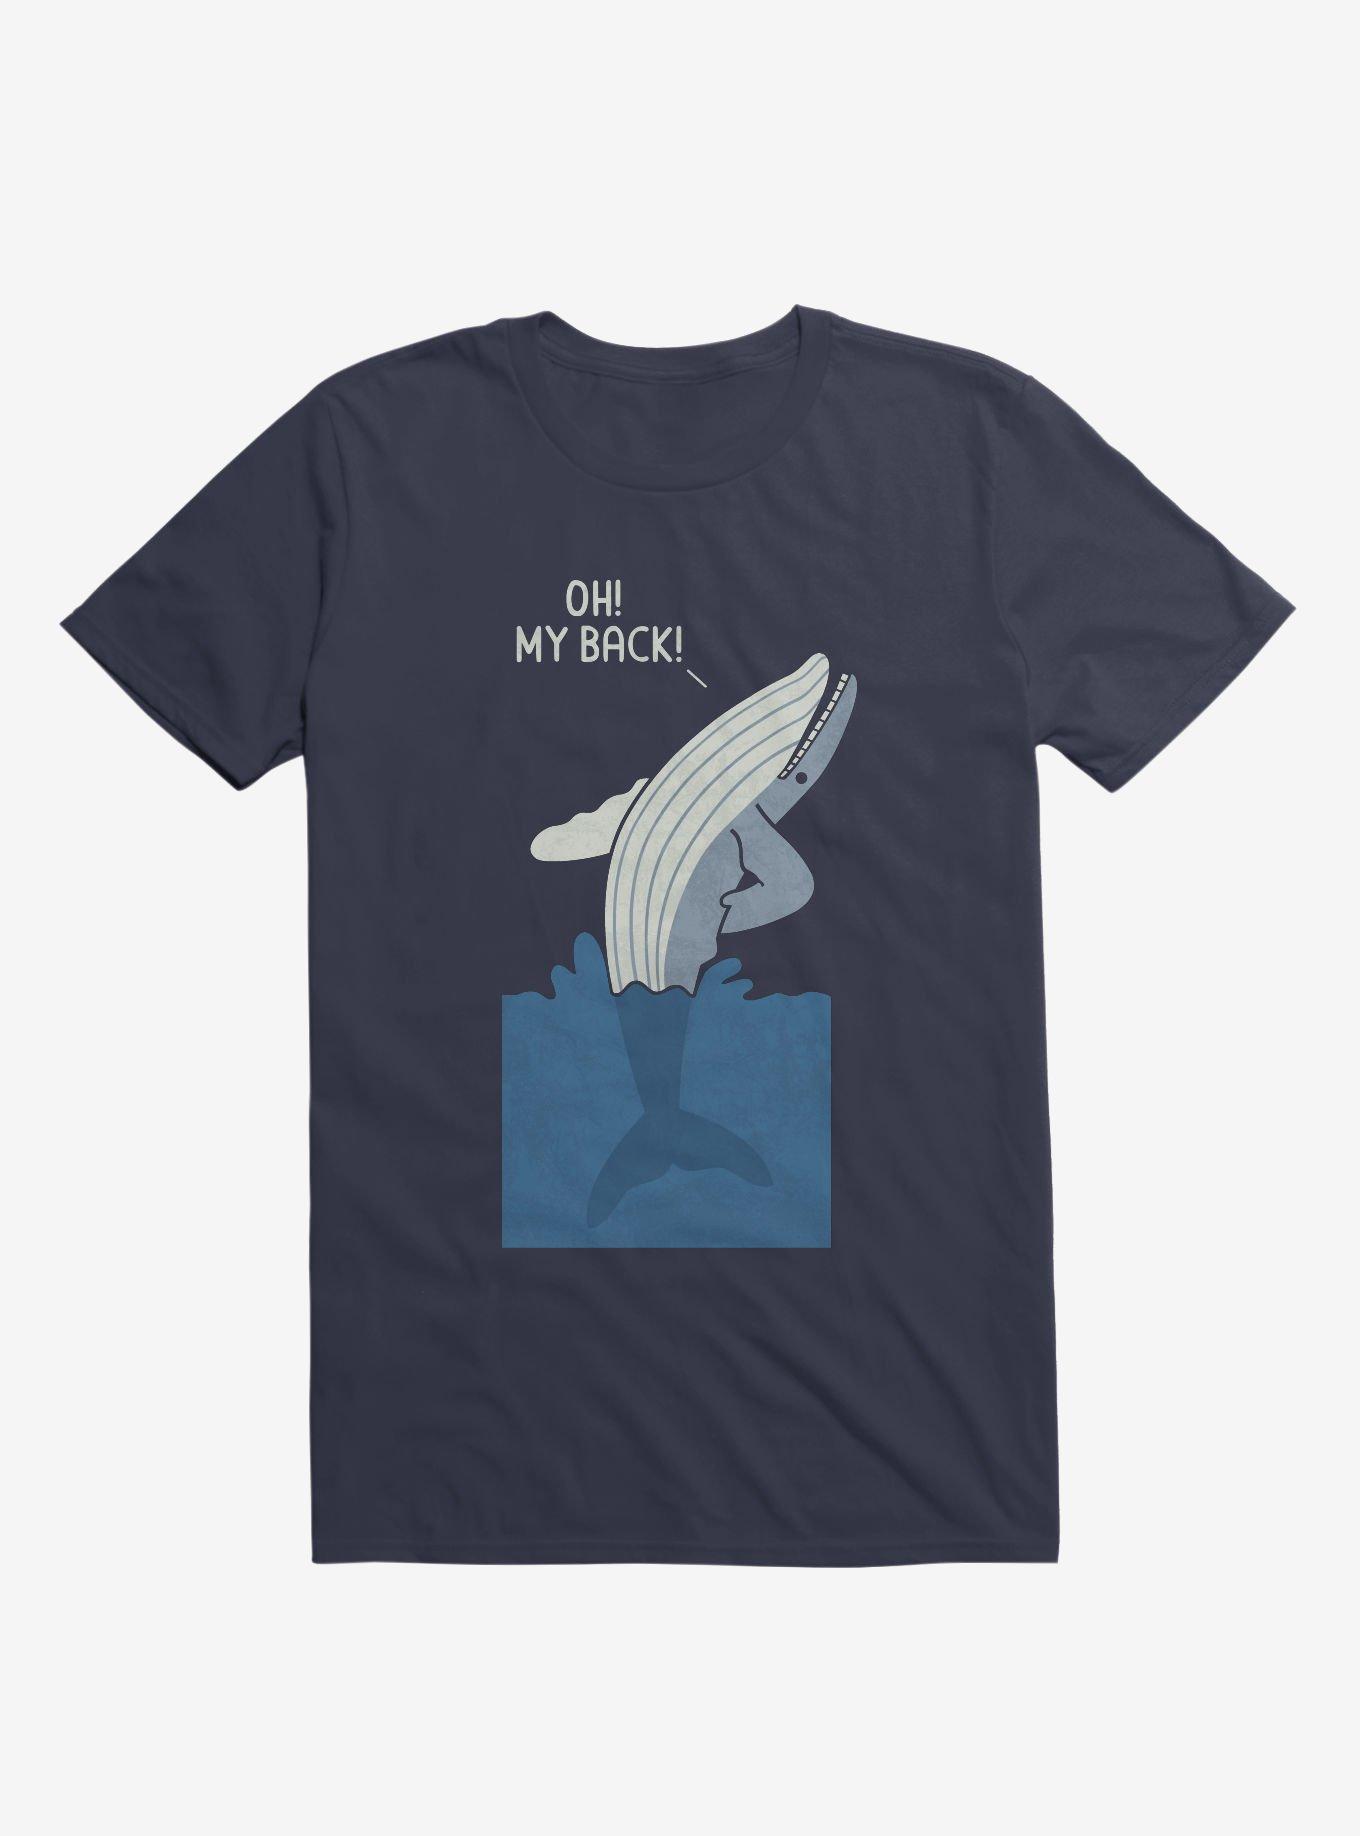 Bad Back Whale Oh! My Back! Navy Blue T-Shirt, NAVY, hi-res